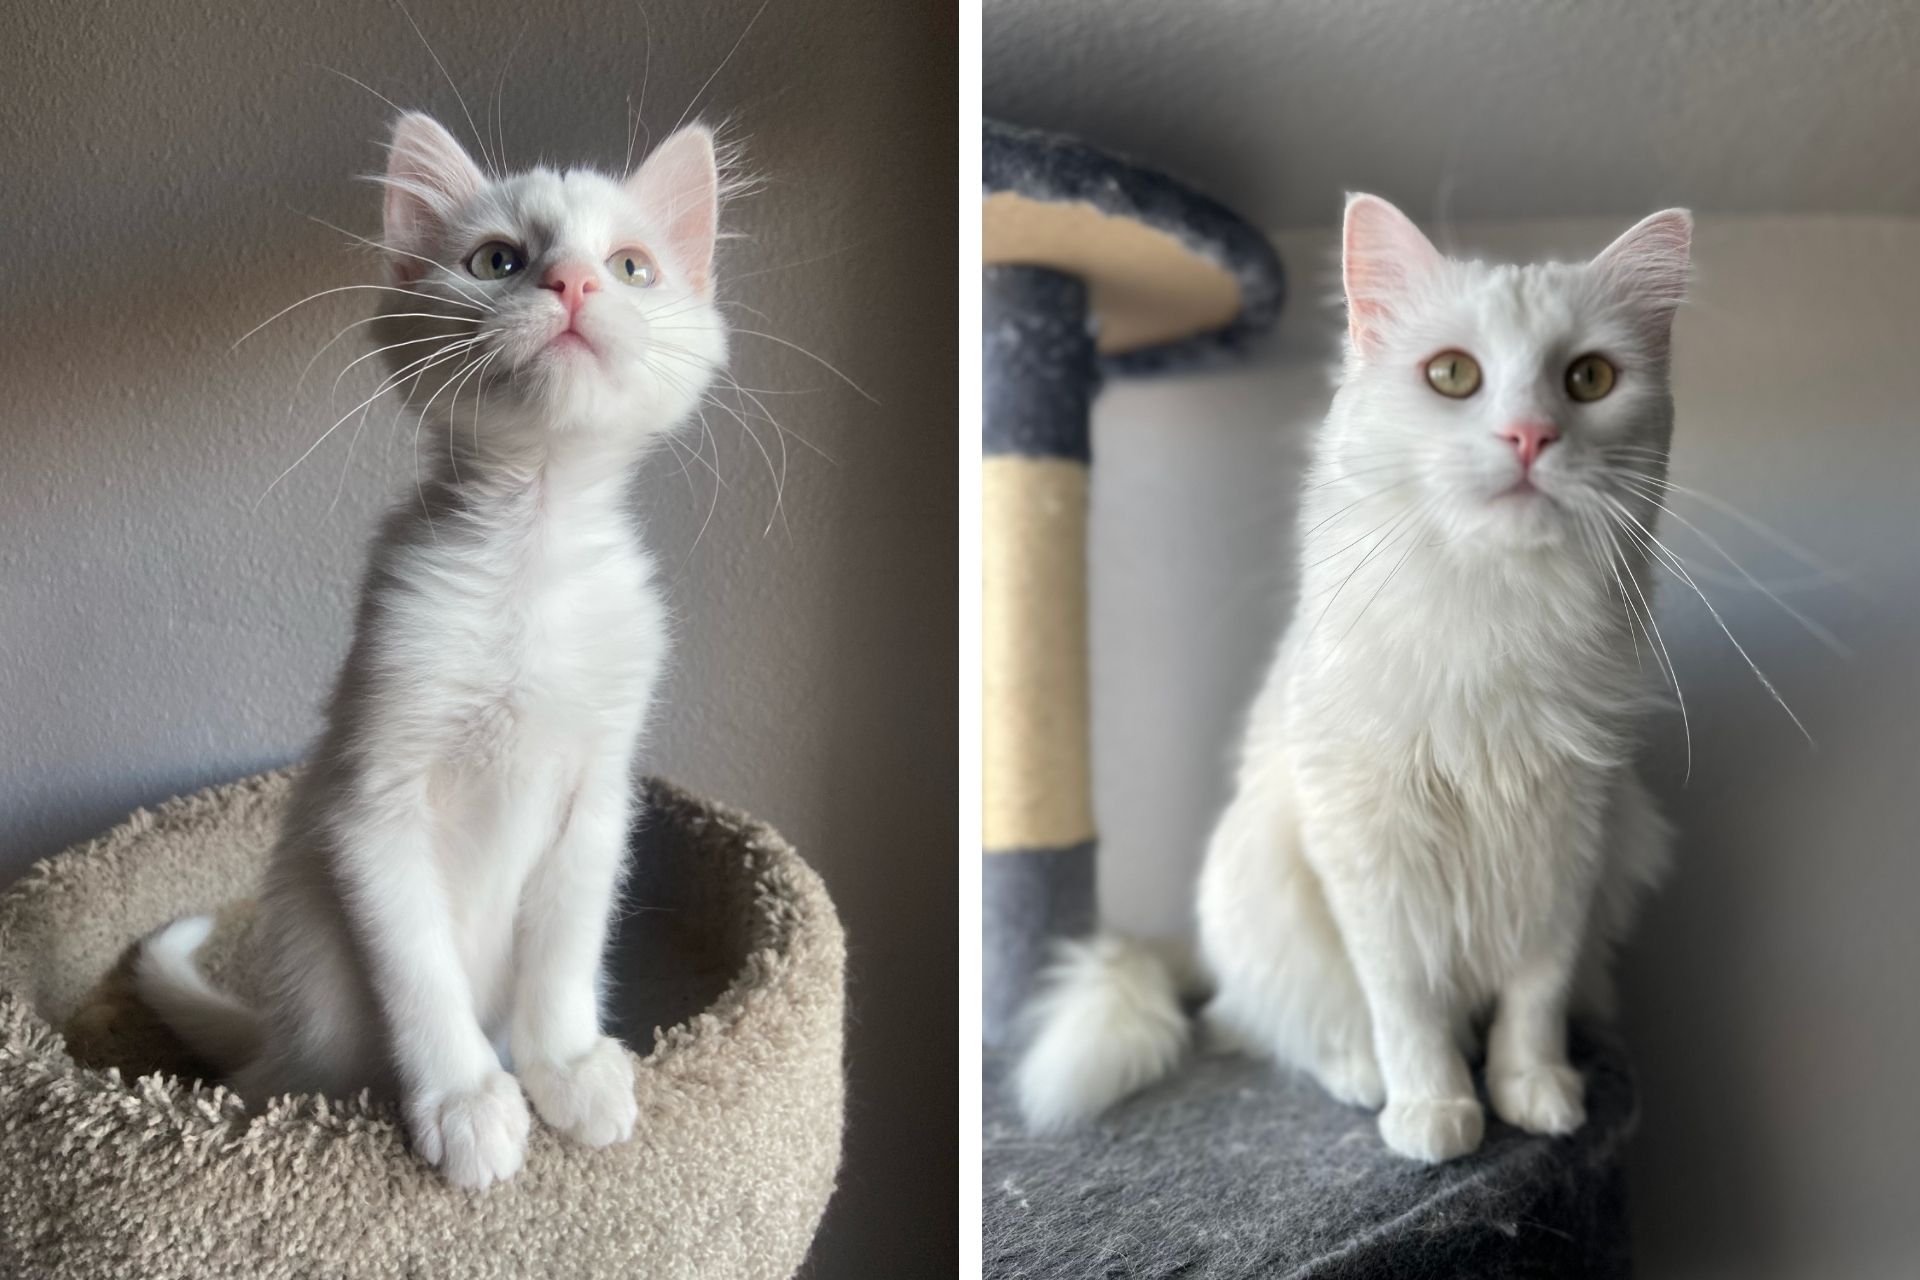 A white cat is shown as a kitten and as an adult